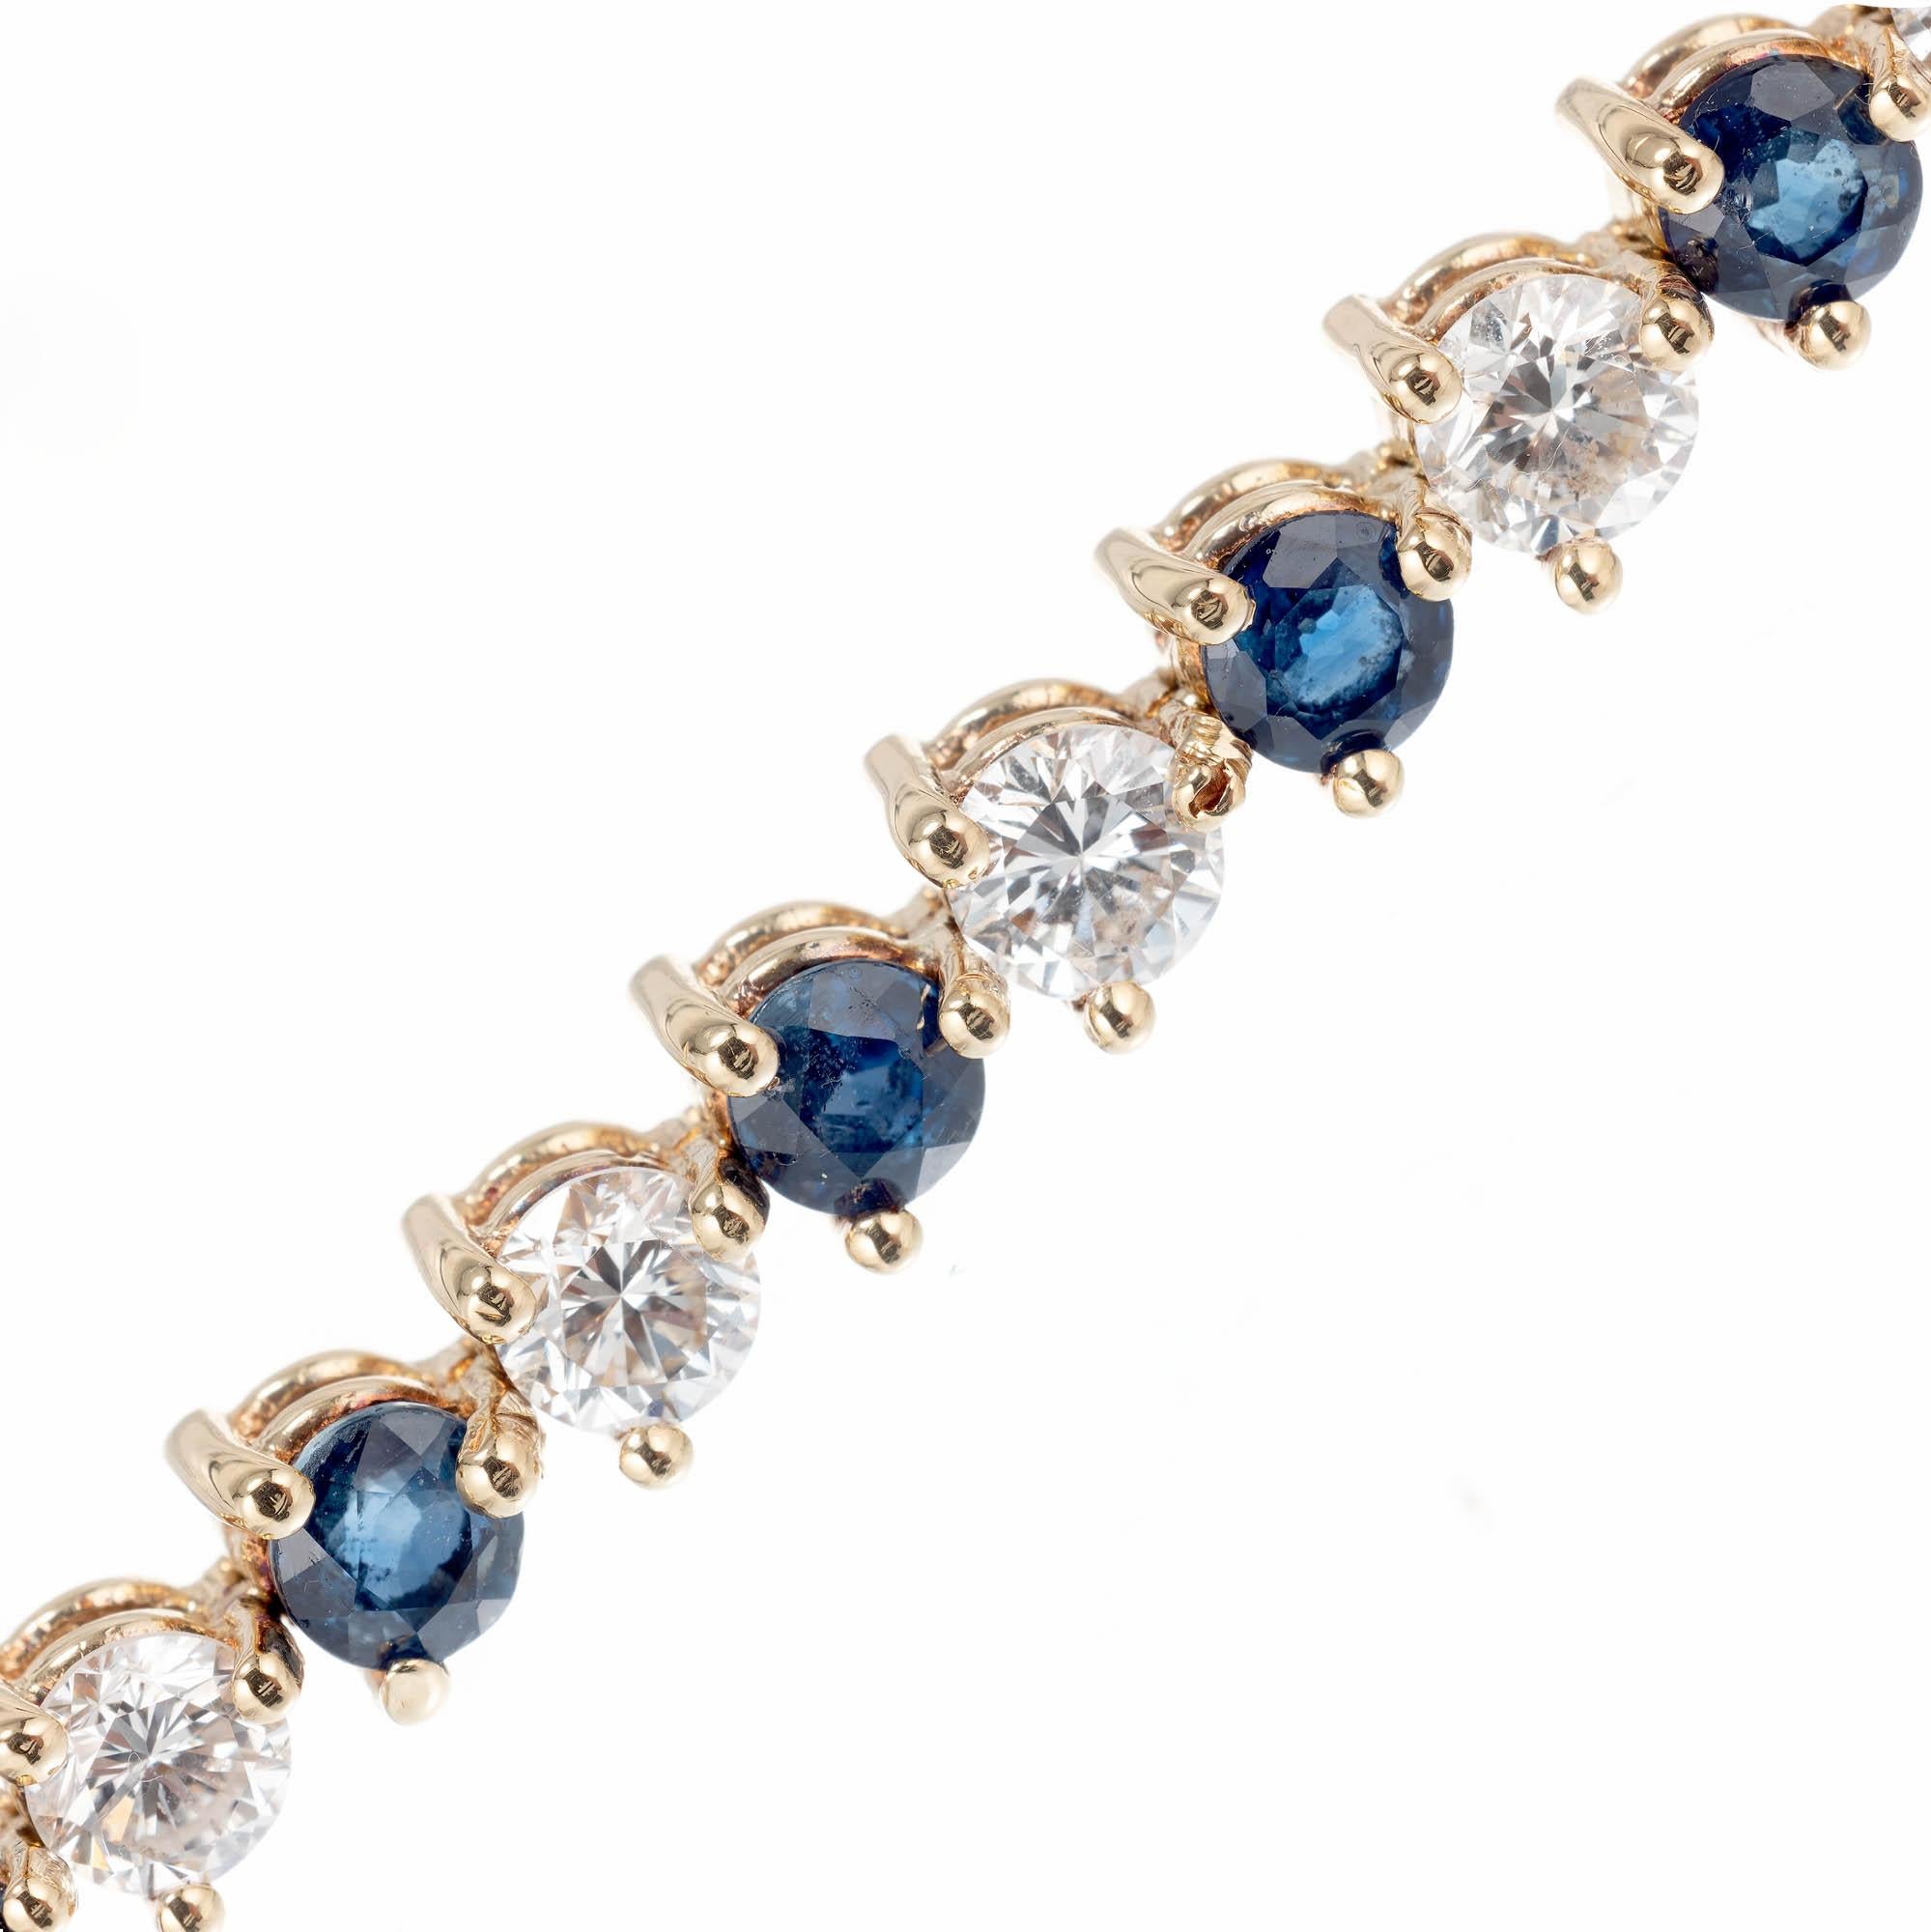 Sapphire and diamond link bracelet.  18k yellow gold,  three prong basket hinged link bracelet. 

21 Diamonds approx. total weight 4.20cts, H to I, VS1-VS2
21 Blue Sapphires approx. total weight 3.15cts
18k Yellow Gold
Stamped: 750 = 18k
12.6